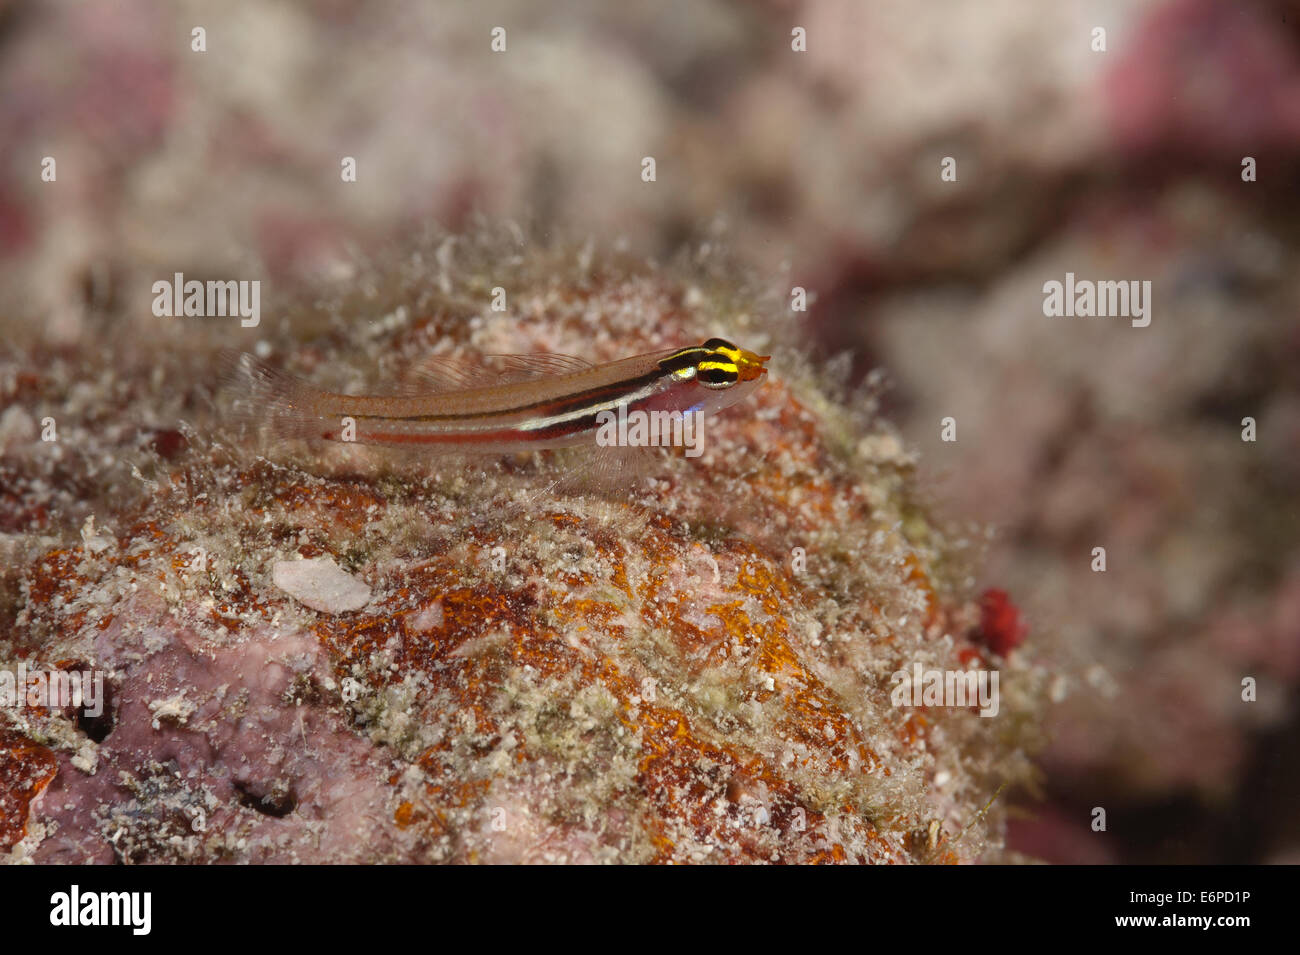 Yellow and whitestriped pygmygoby in Maldives, Indian Ocean Stock Photo